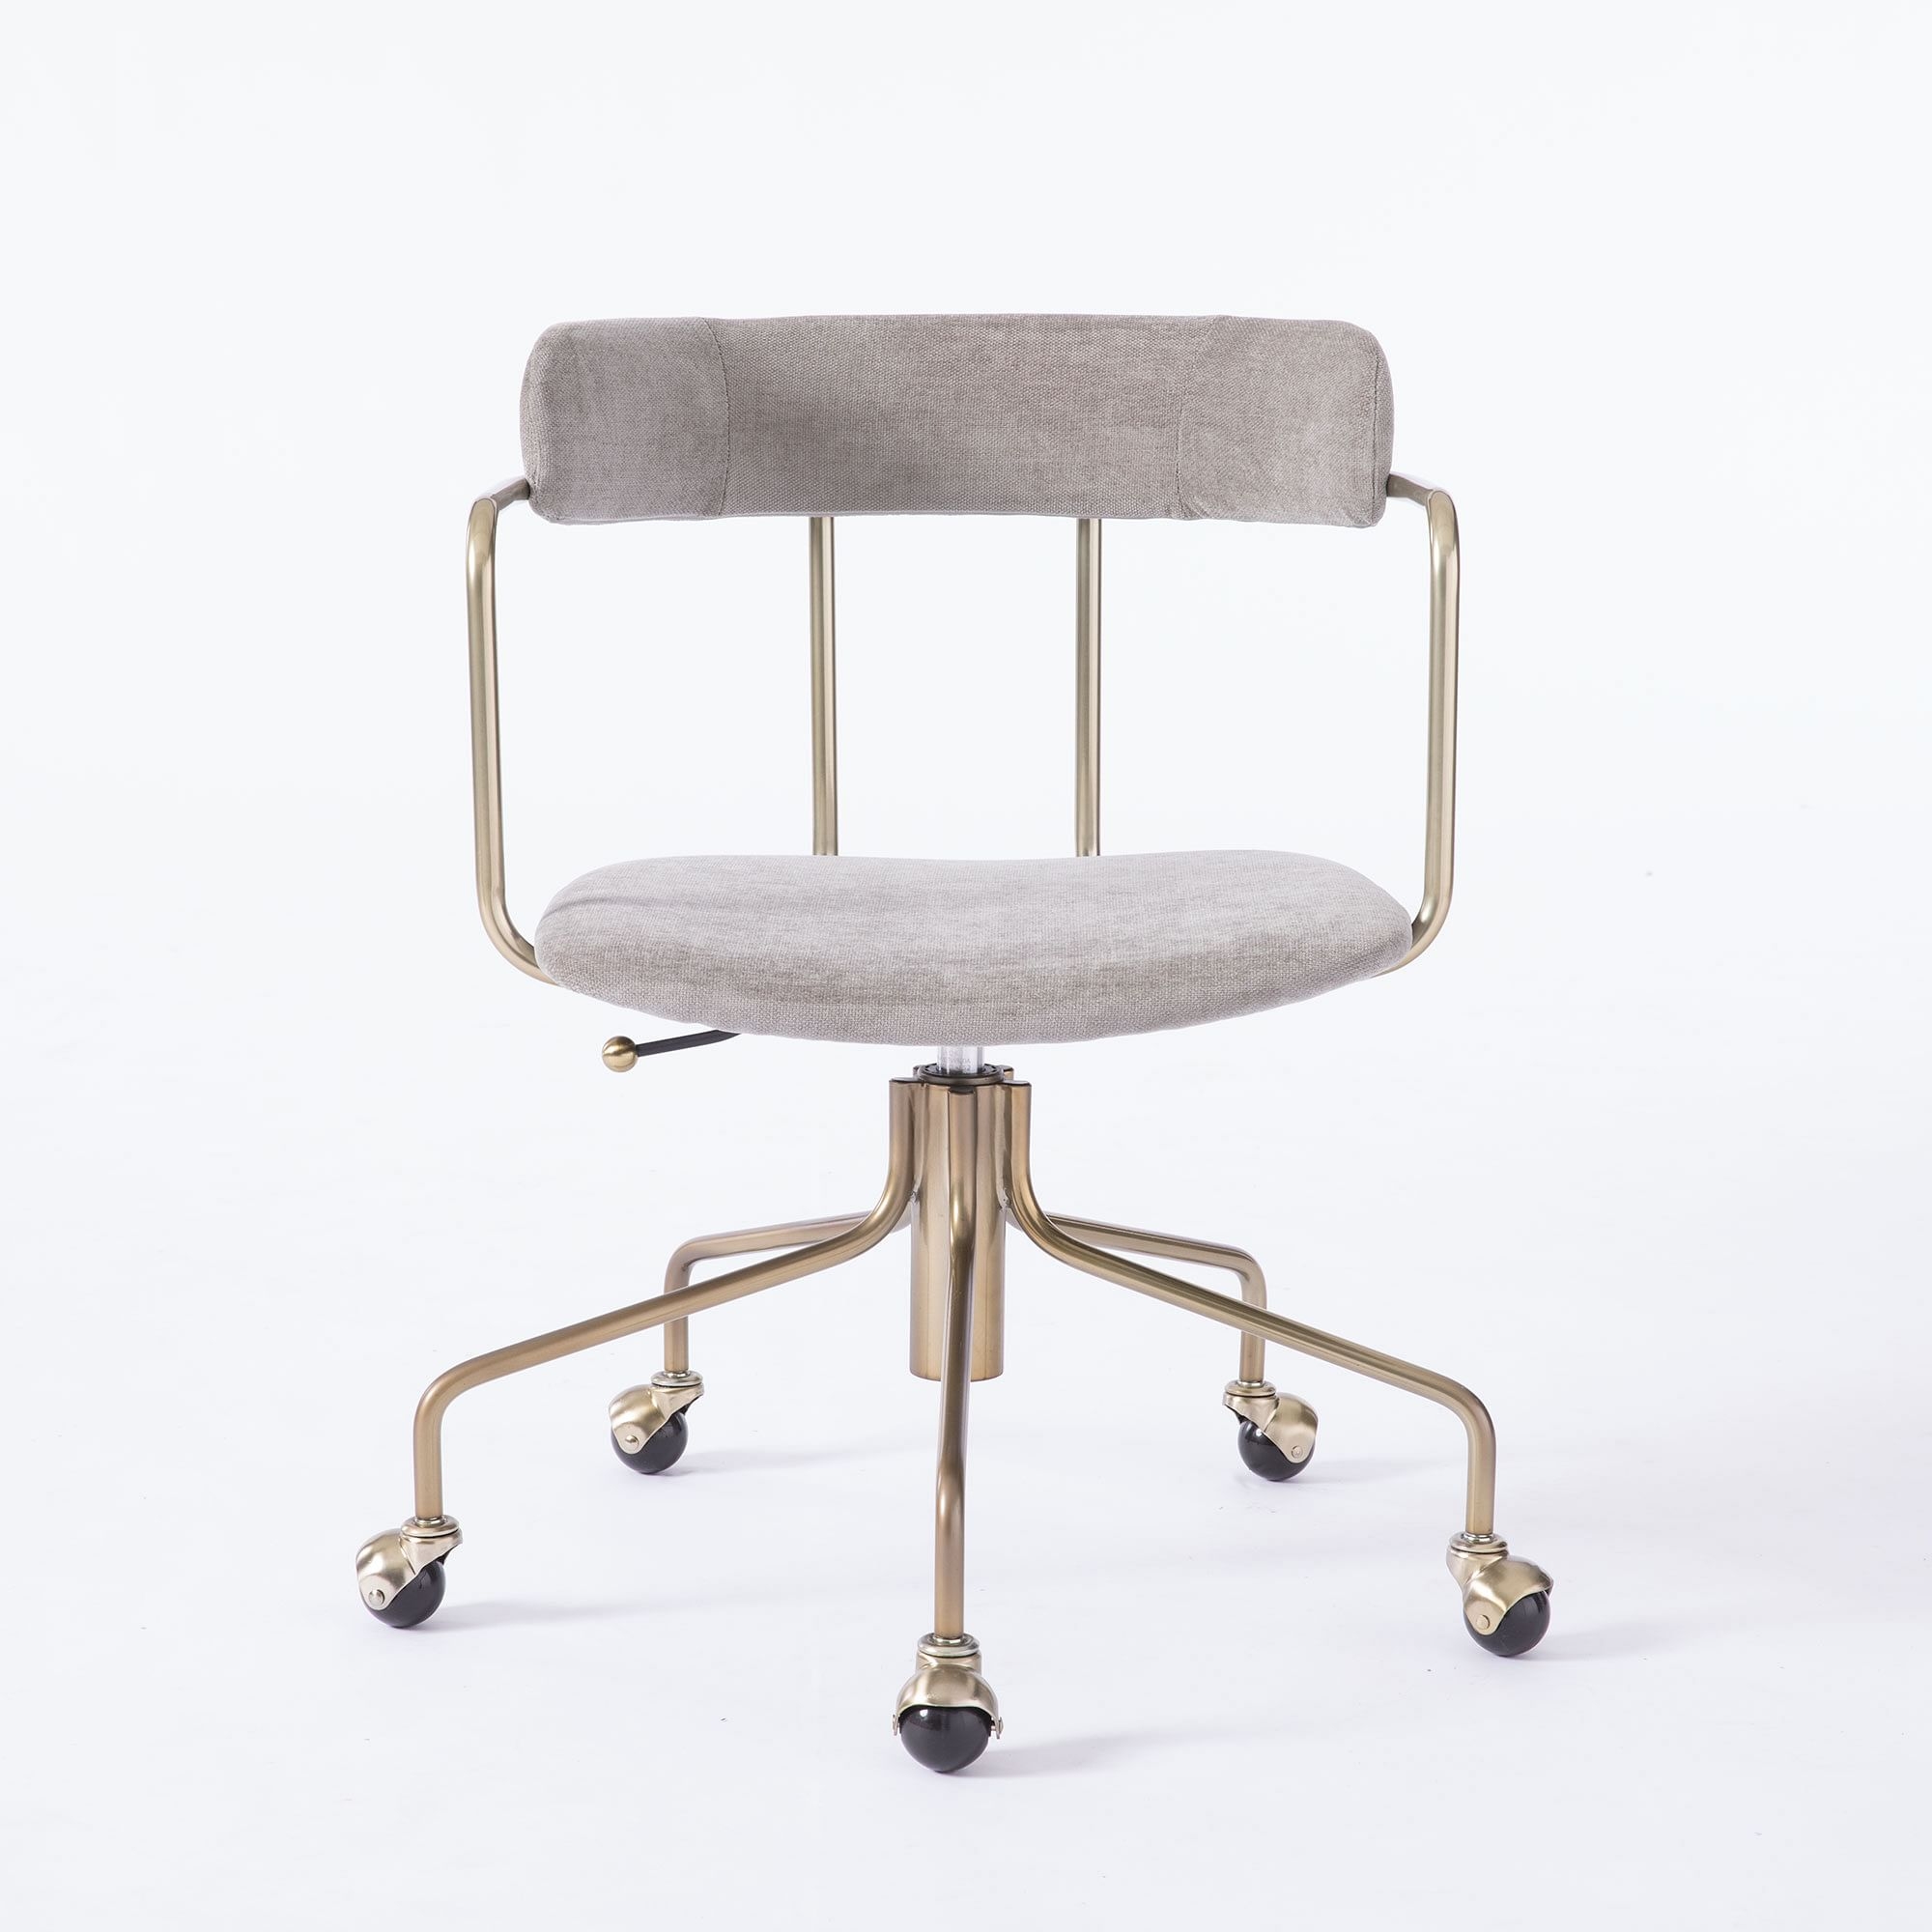 Lennox Office Chair Collection Blush/Blackened Brass Office Chair - Image 1